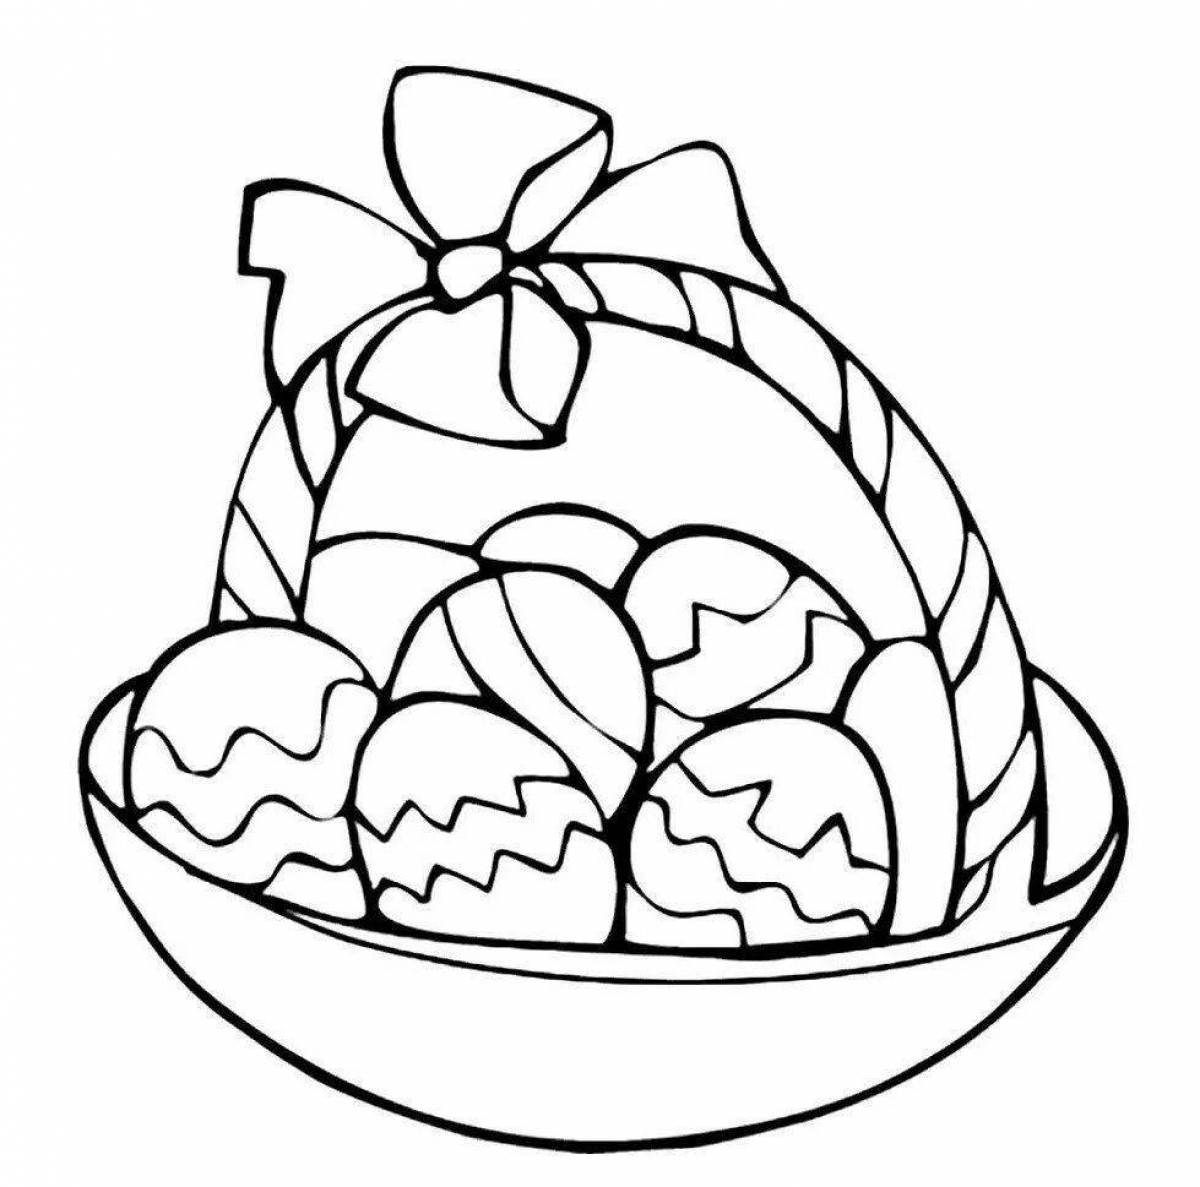 Great Easter coloring book for kids